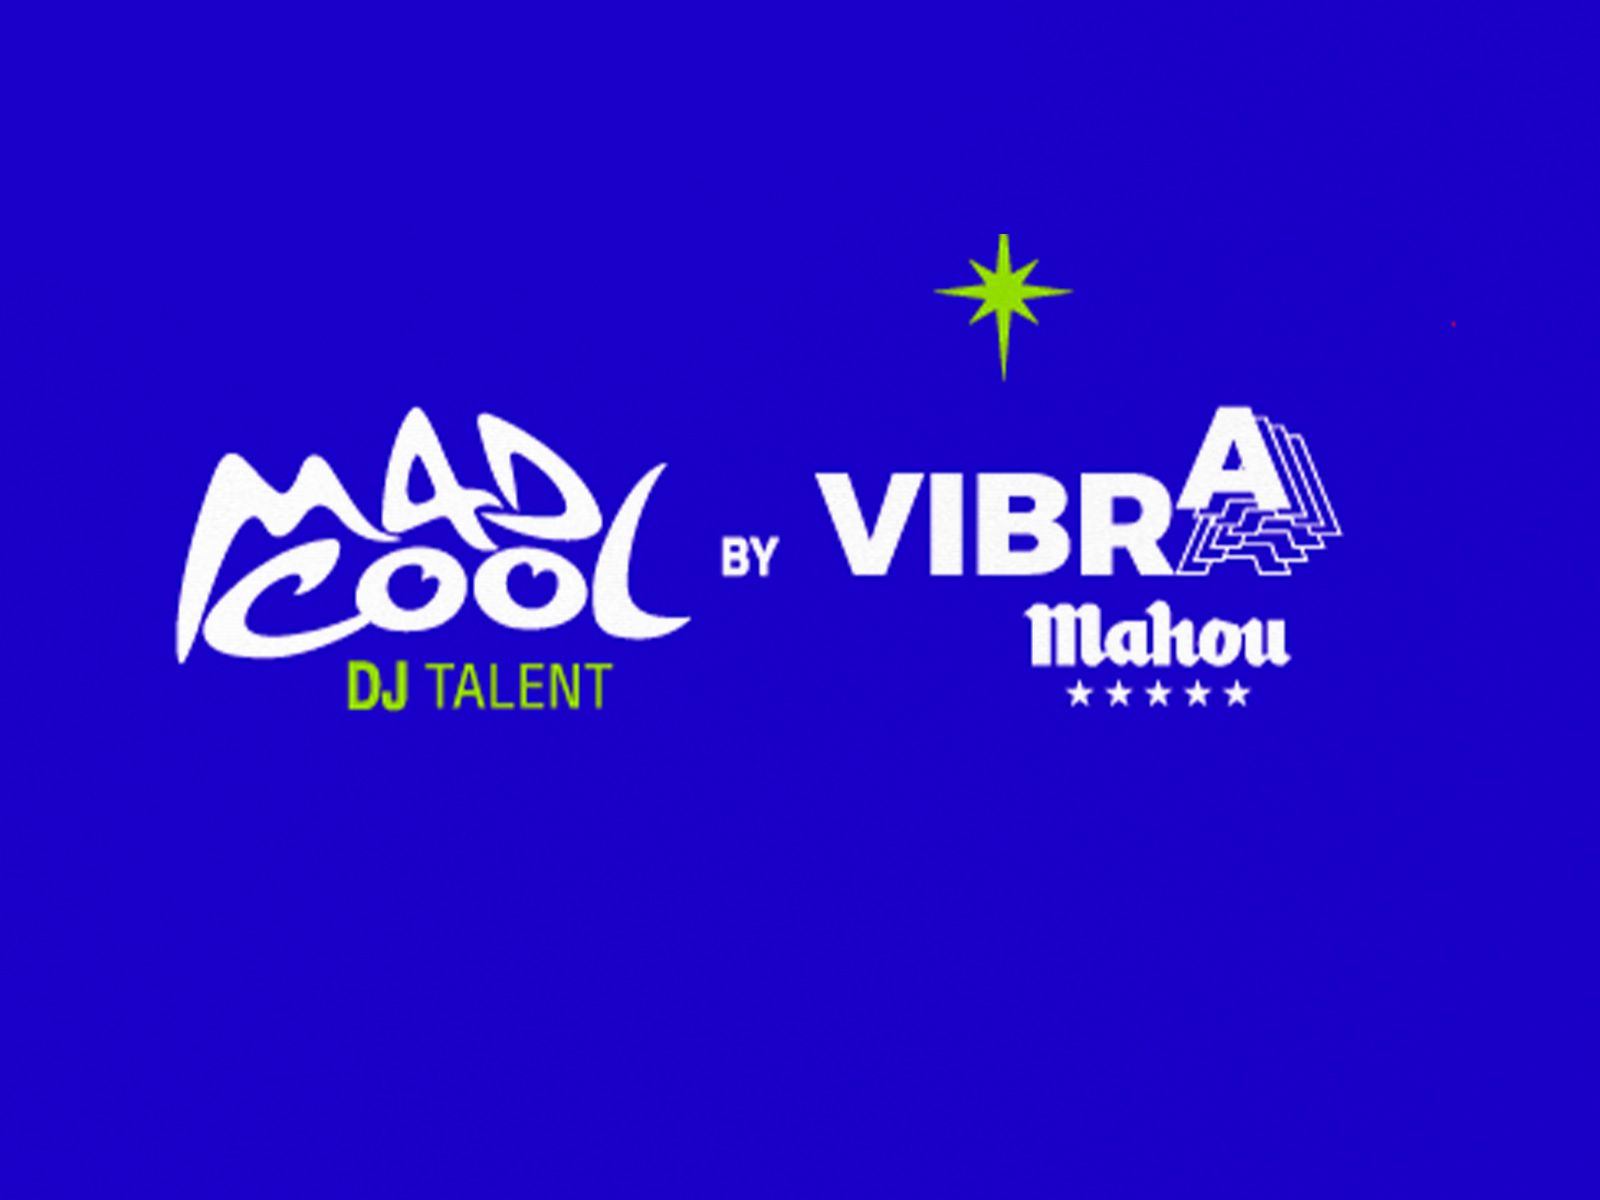 Registration open for Mad Cool DJ Talent by Vibra Mahou